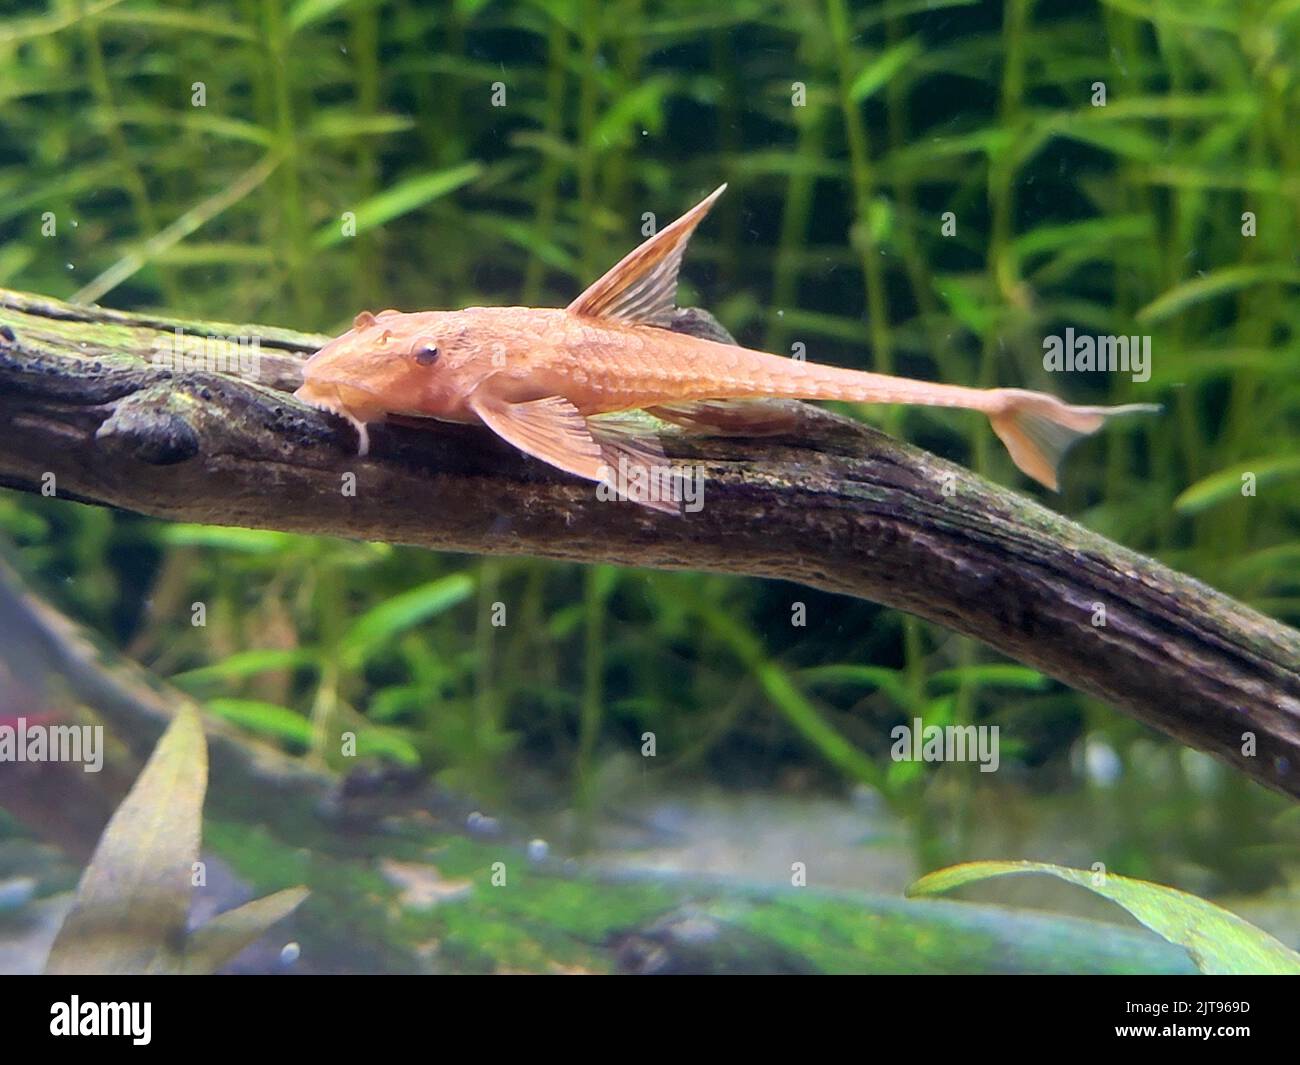 The red lizard catfish on wood in background of water plants Stock Photo